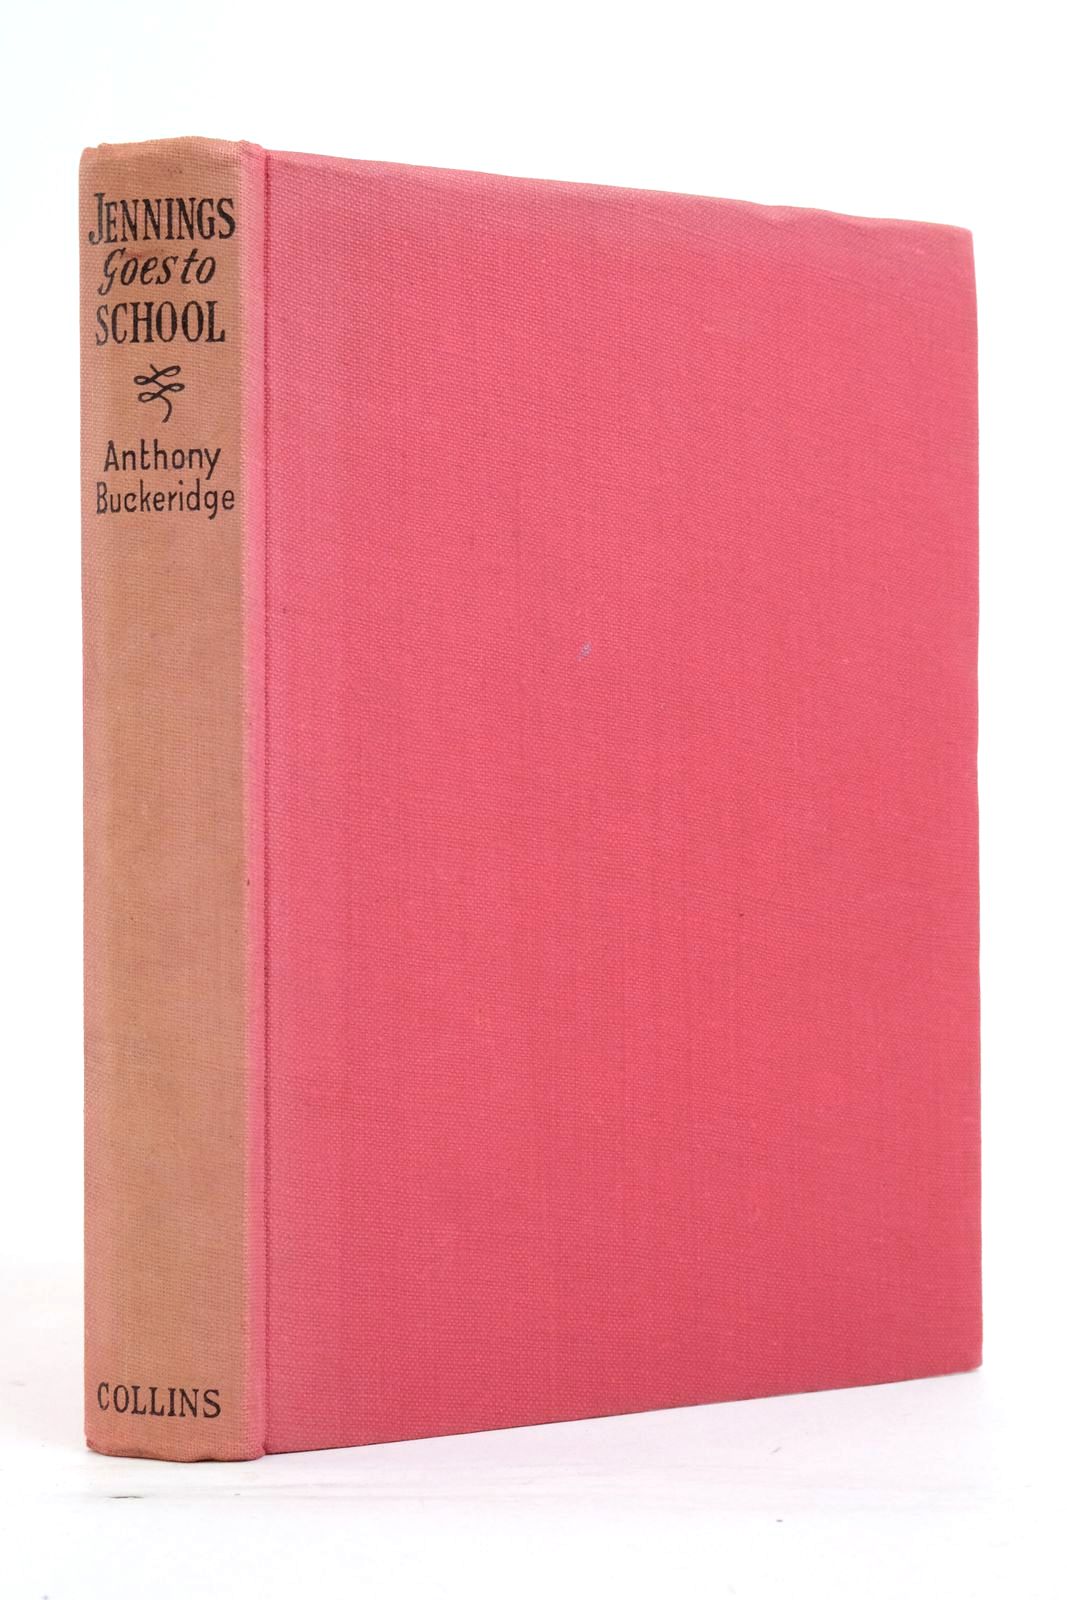 Photo of JENNINGS GOES TO SCHOOL written by Buckeridge, Anthony published by Collins (STOCK CODE: 2137027)  for sale by Stella & Rose's Books